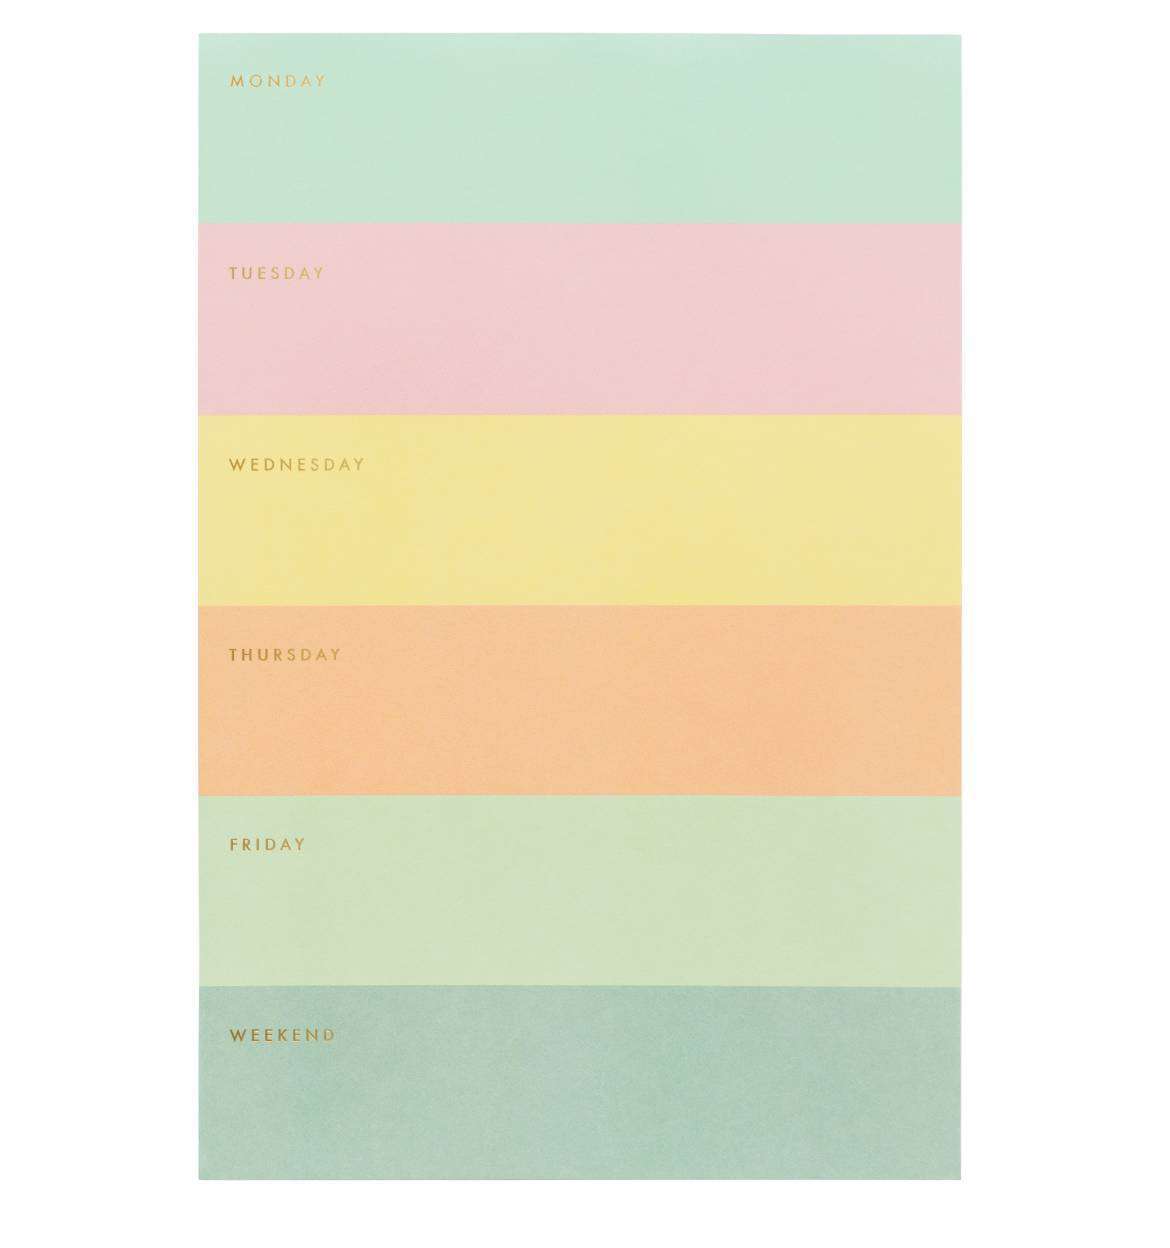 Affordable Memo Pad green, pink, yellow days of the week